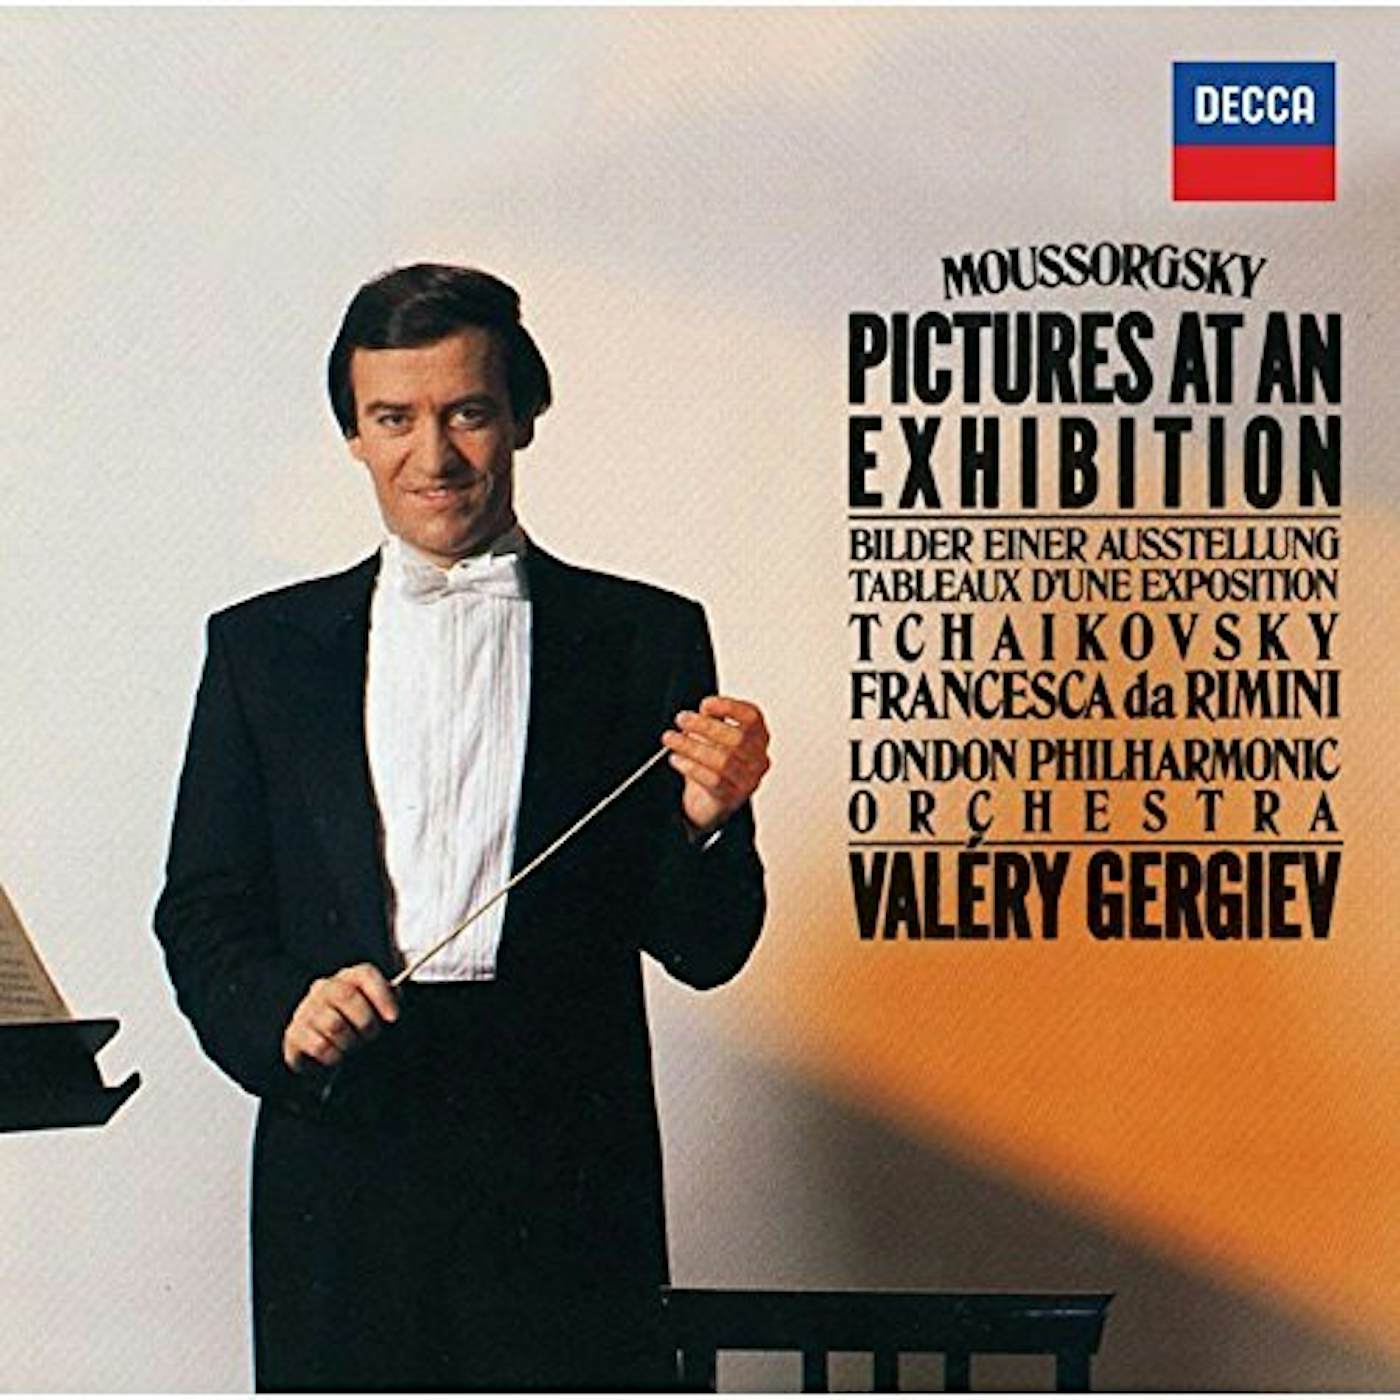 Valery Gergiev MOUSSORGSKY: PICTURES AT AN EXIHIBIT CD